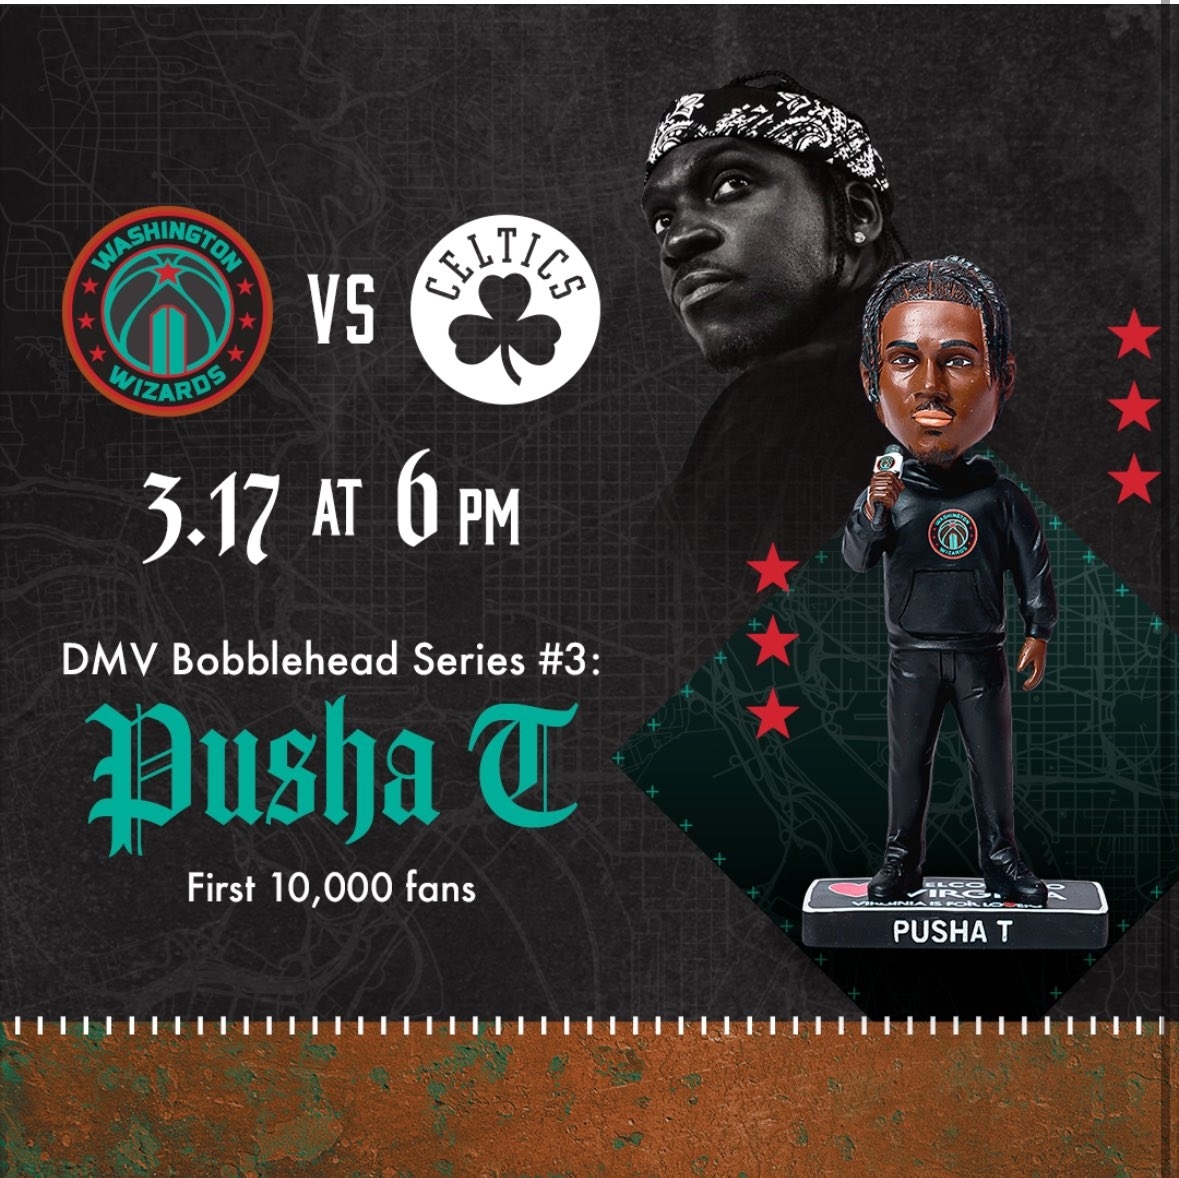 Promotional graphic for Washington Wizards vs. Celtics game with bobblehead giveaway of Pusha T for fans